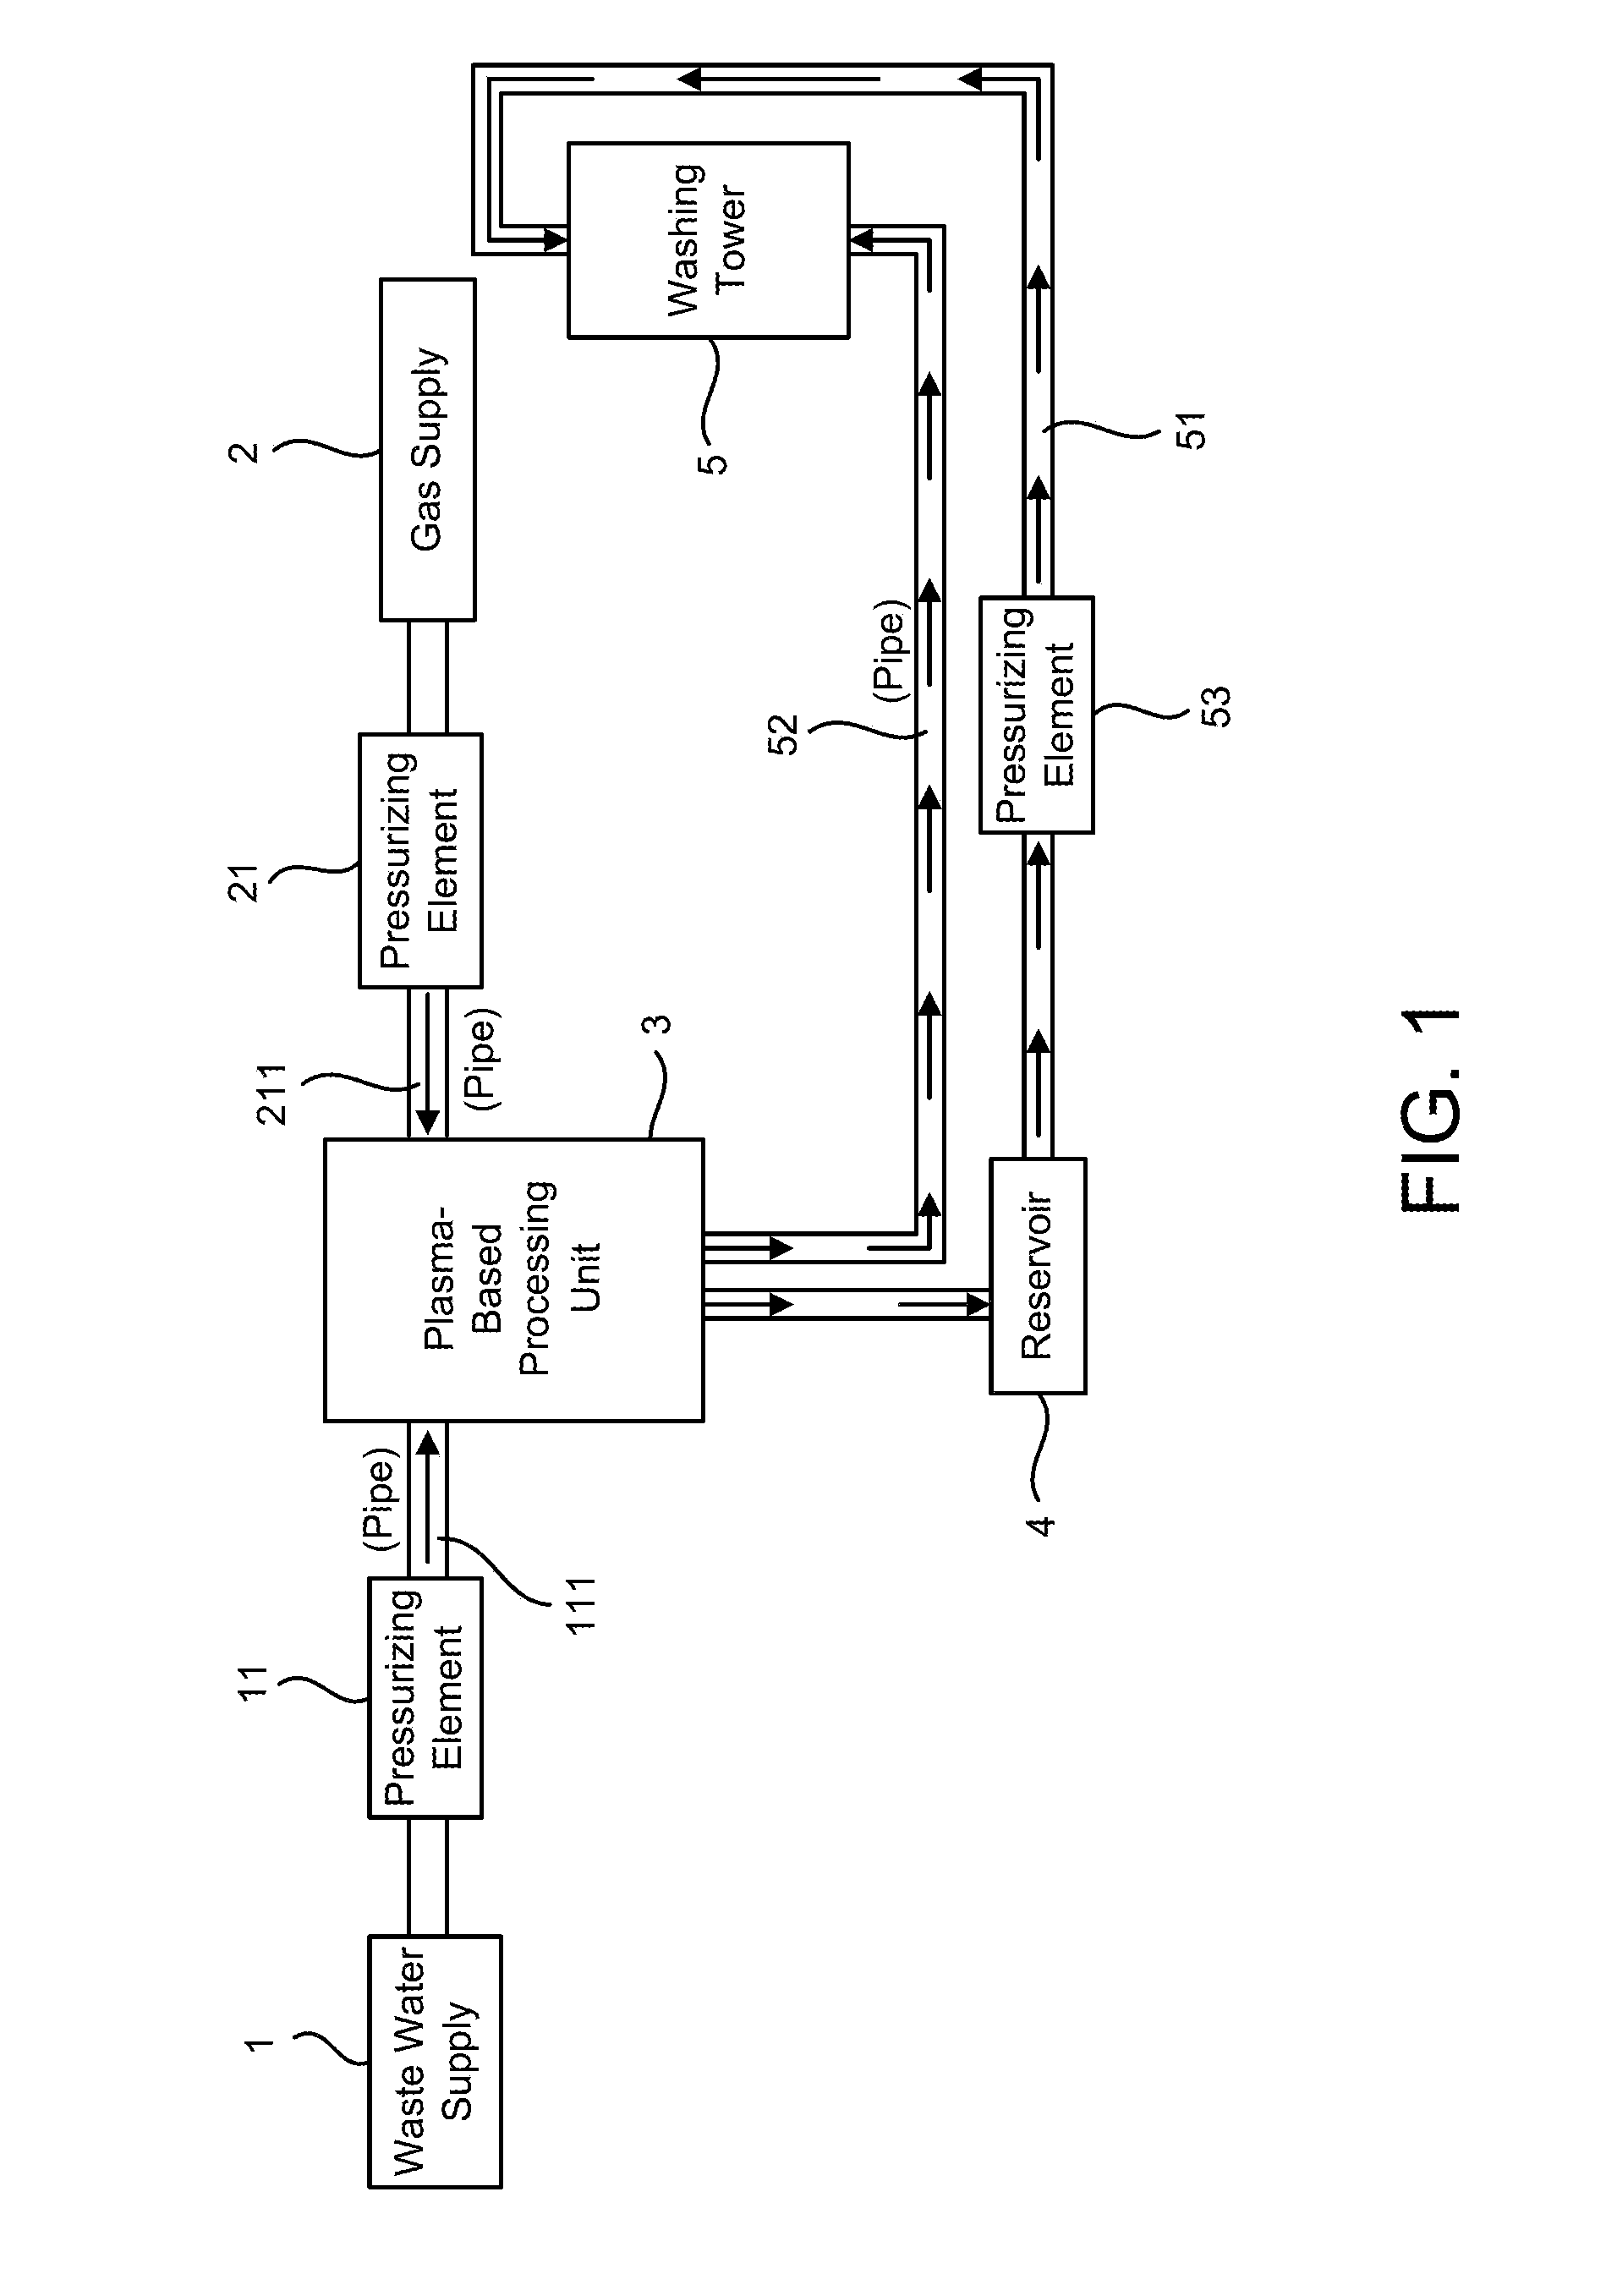 Normal-Pressure Plasma-Based Apparatus for Processing Waste Water by Mixing the Waste Water with Working Gas